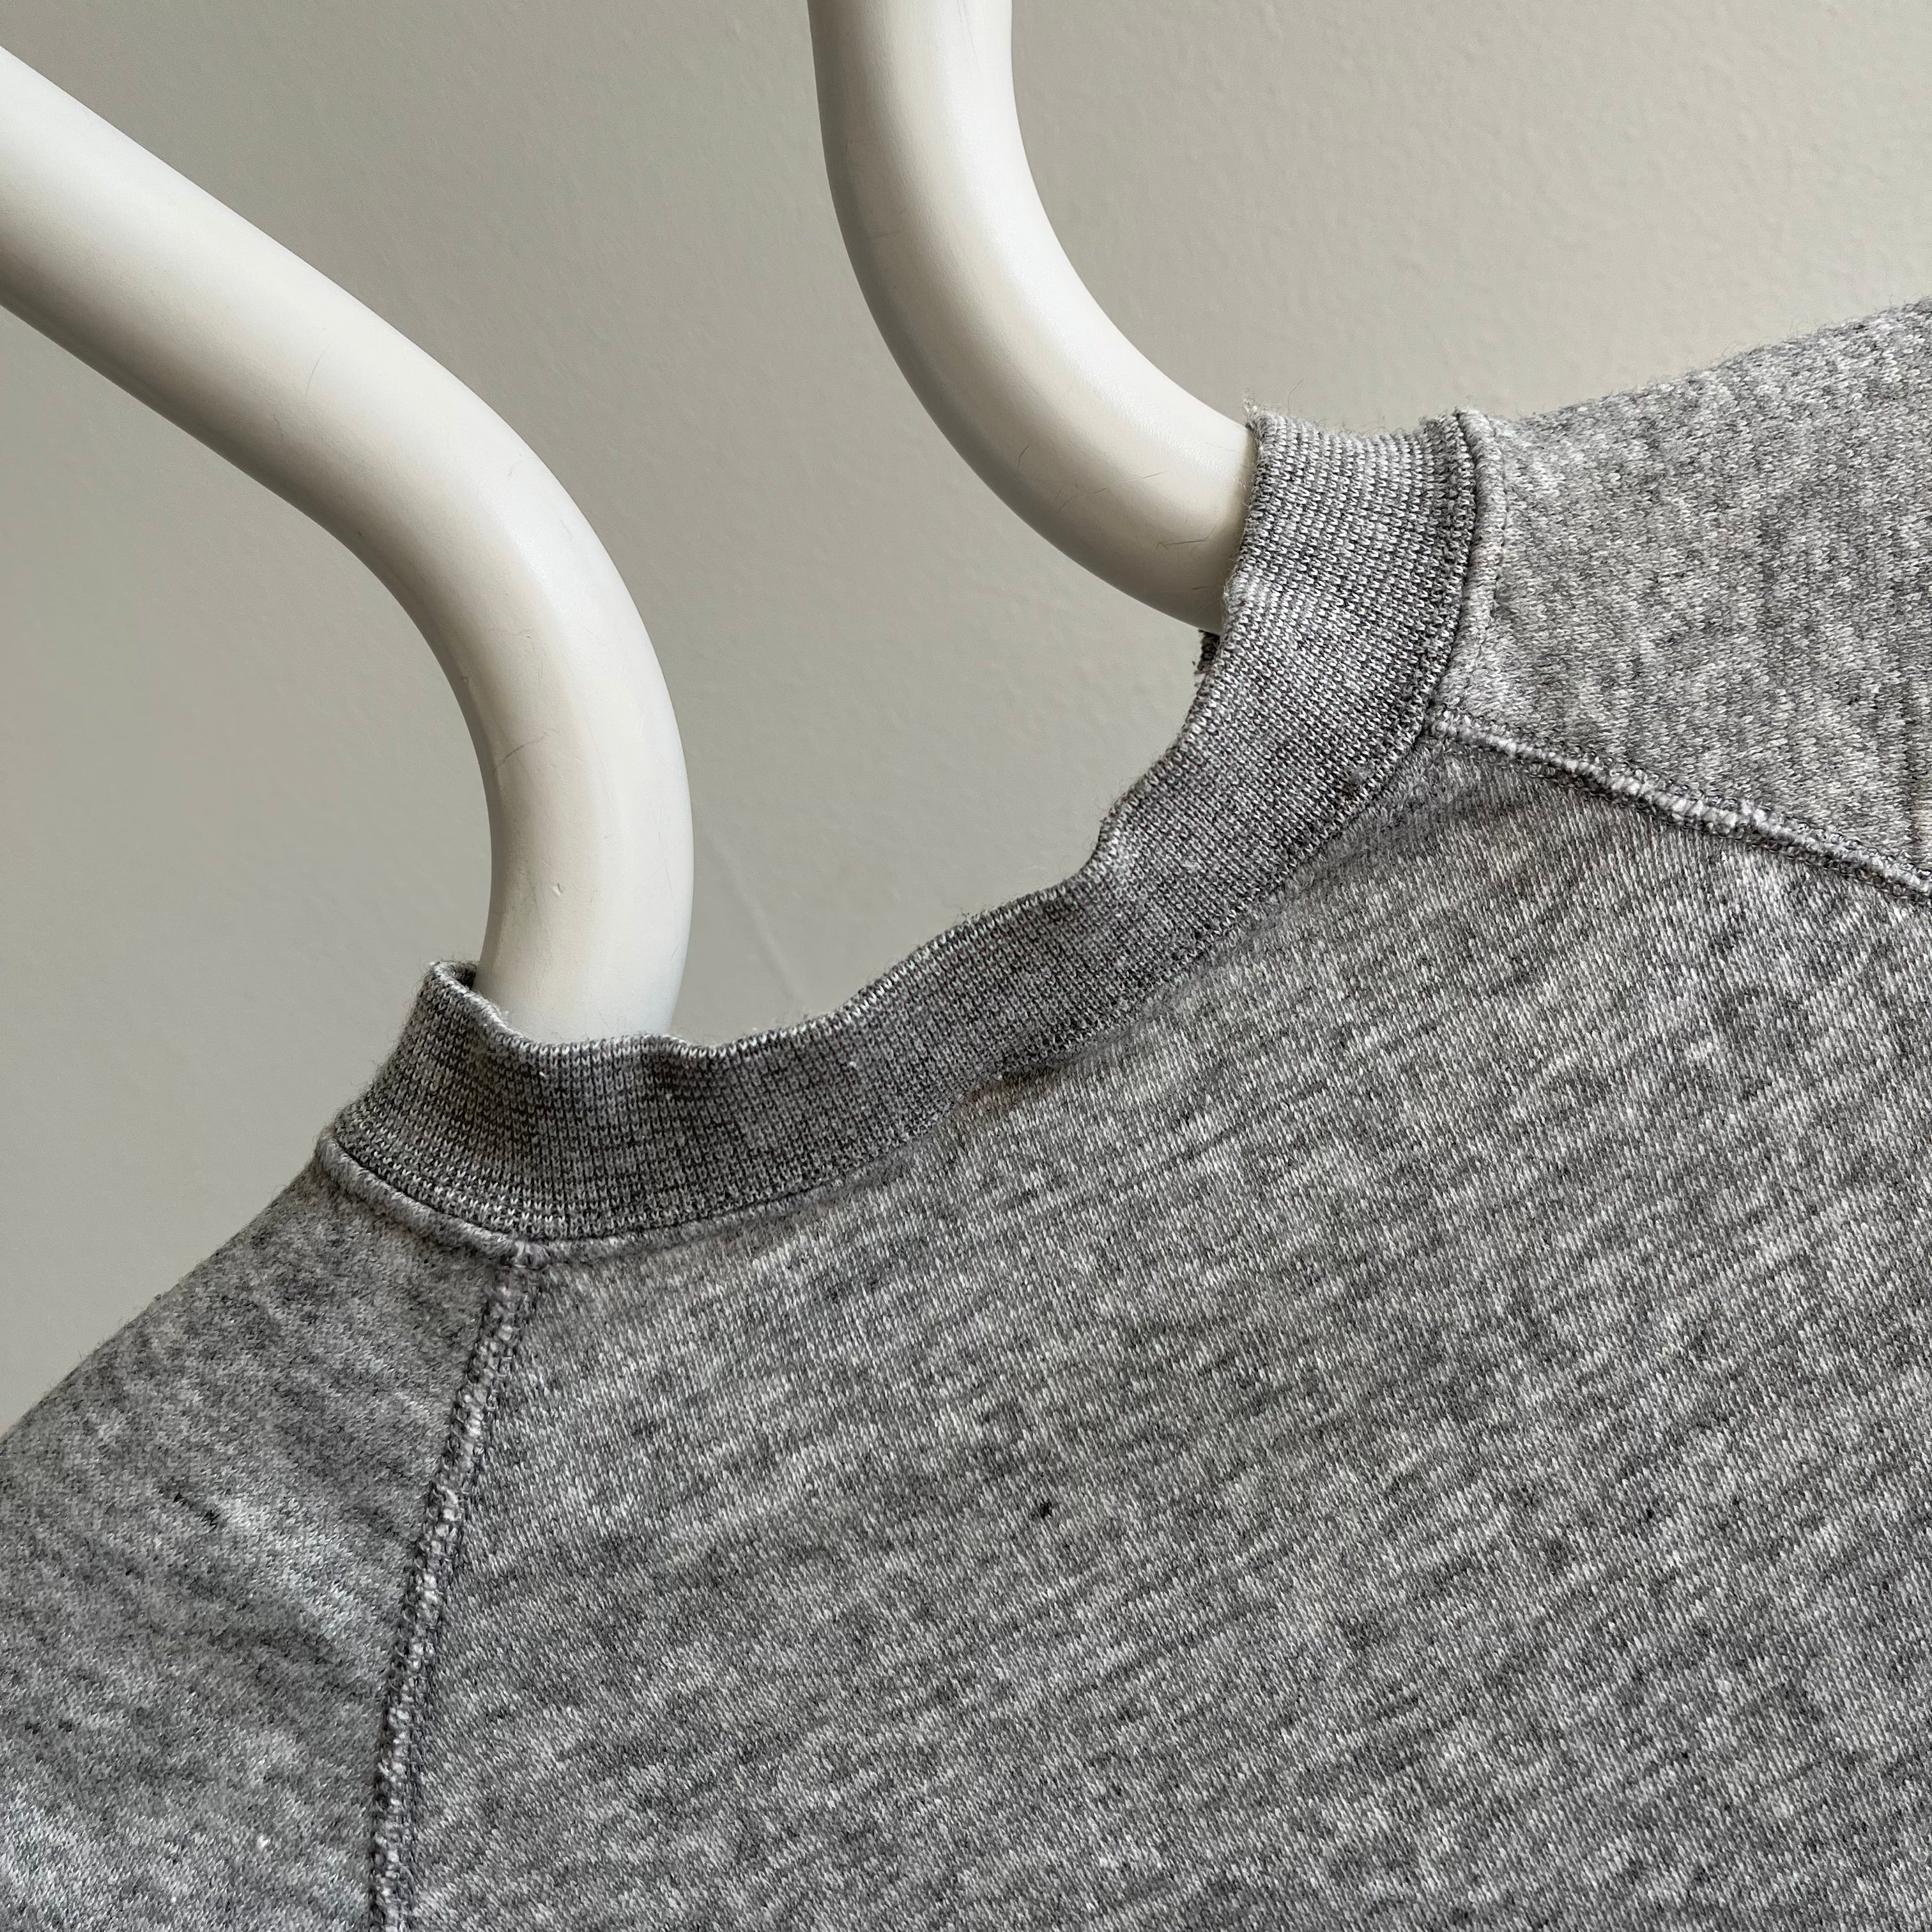 1980s Perfectly Cut Neck Blank Gray Warm Up